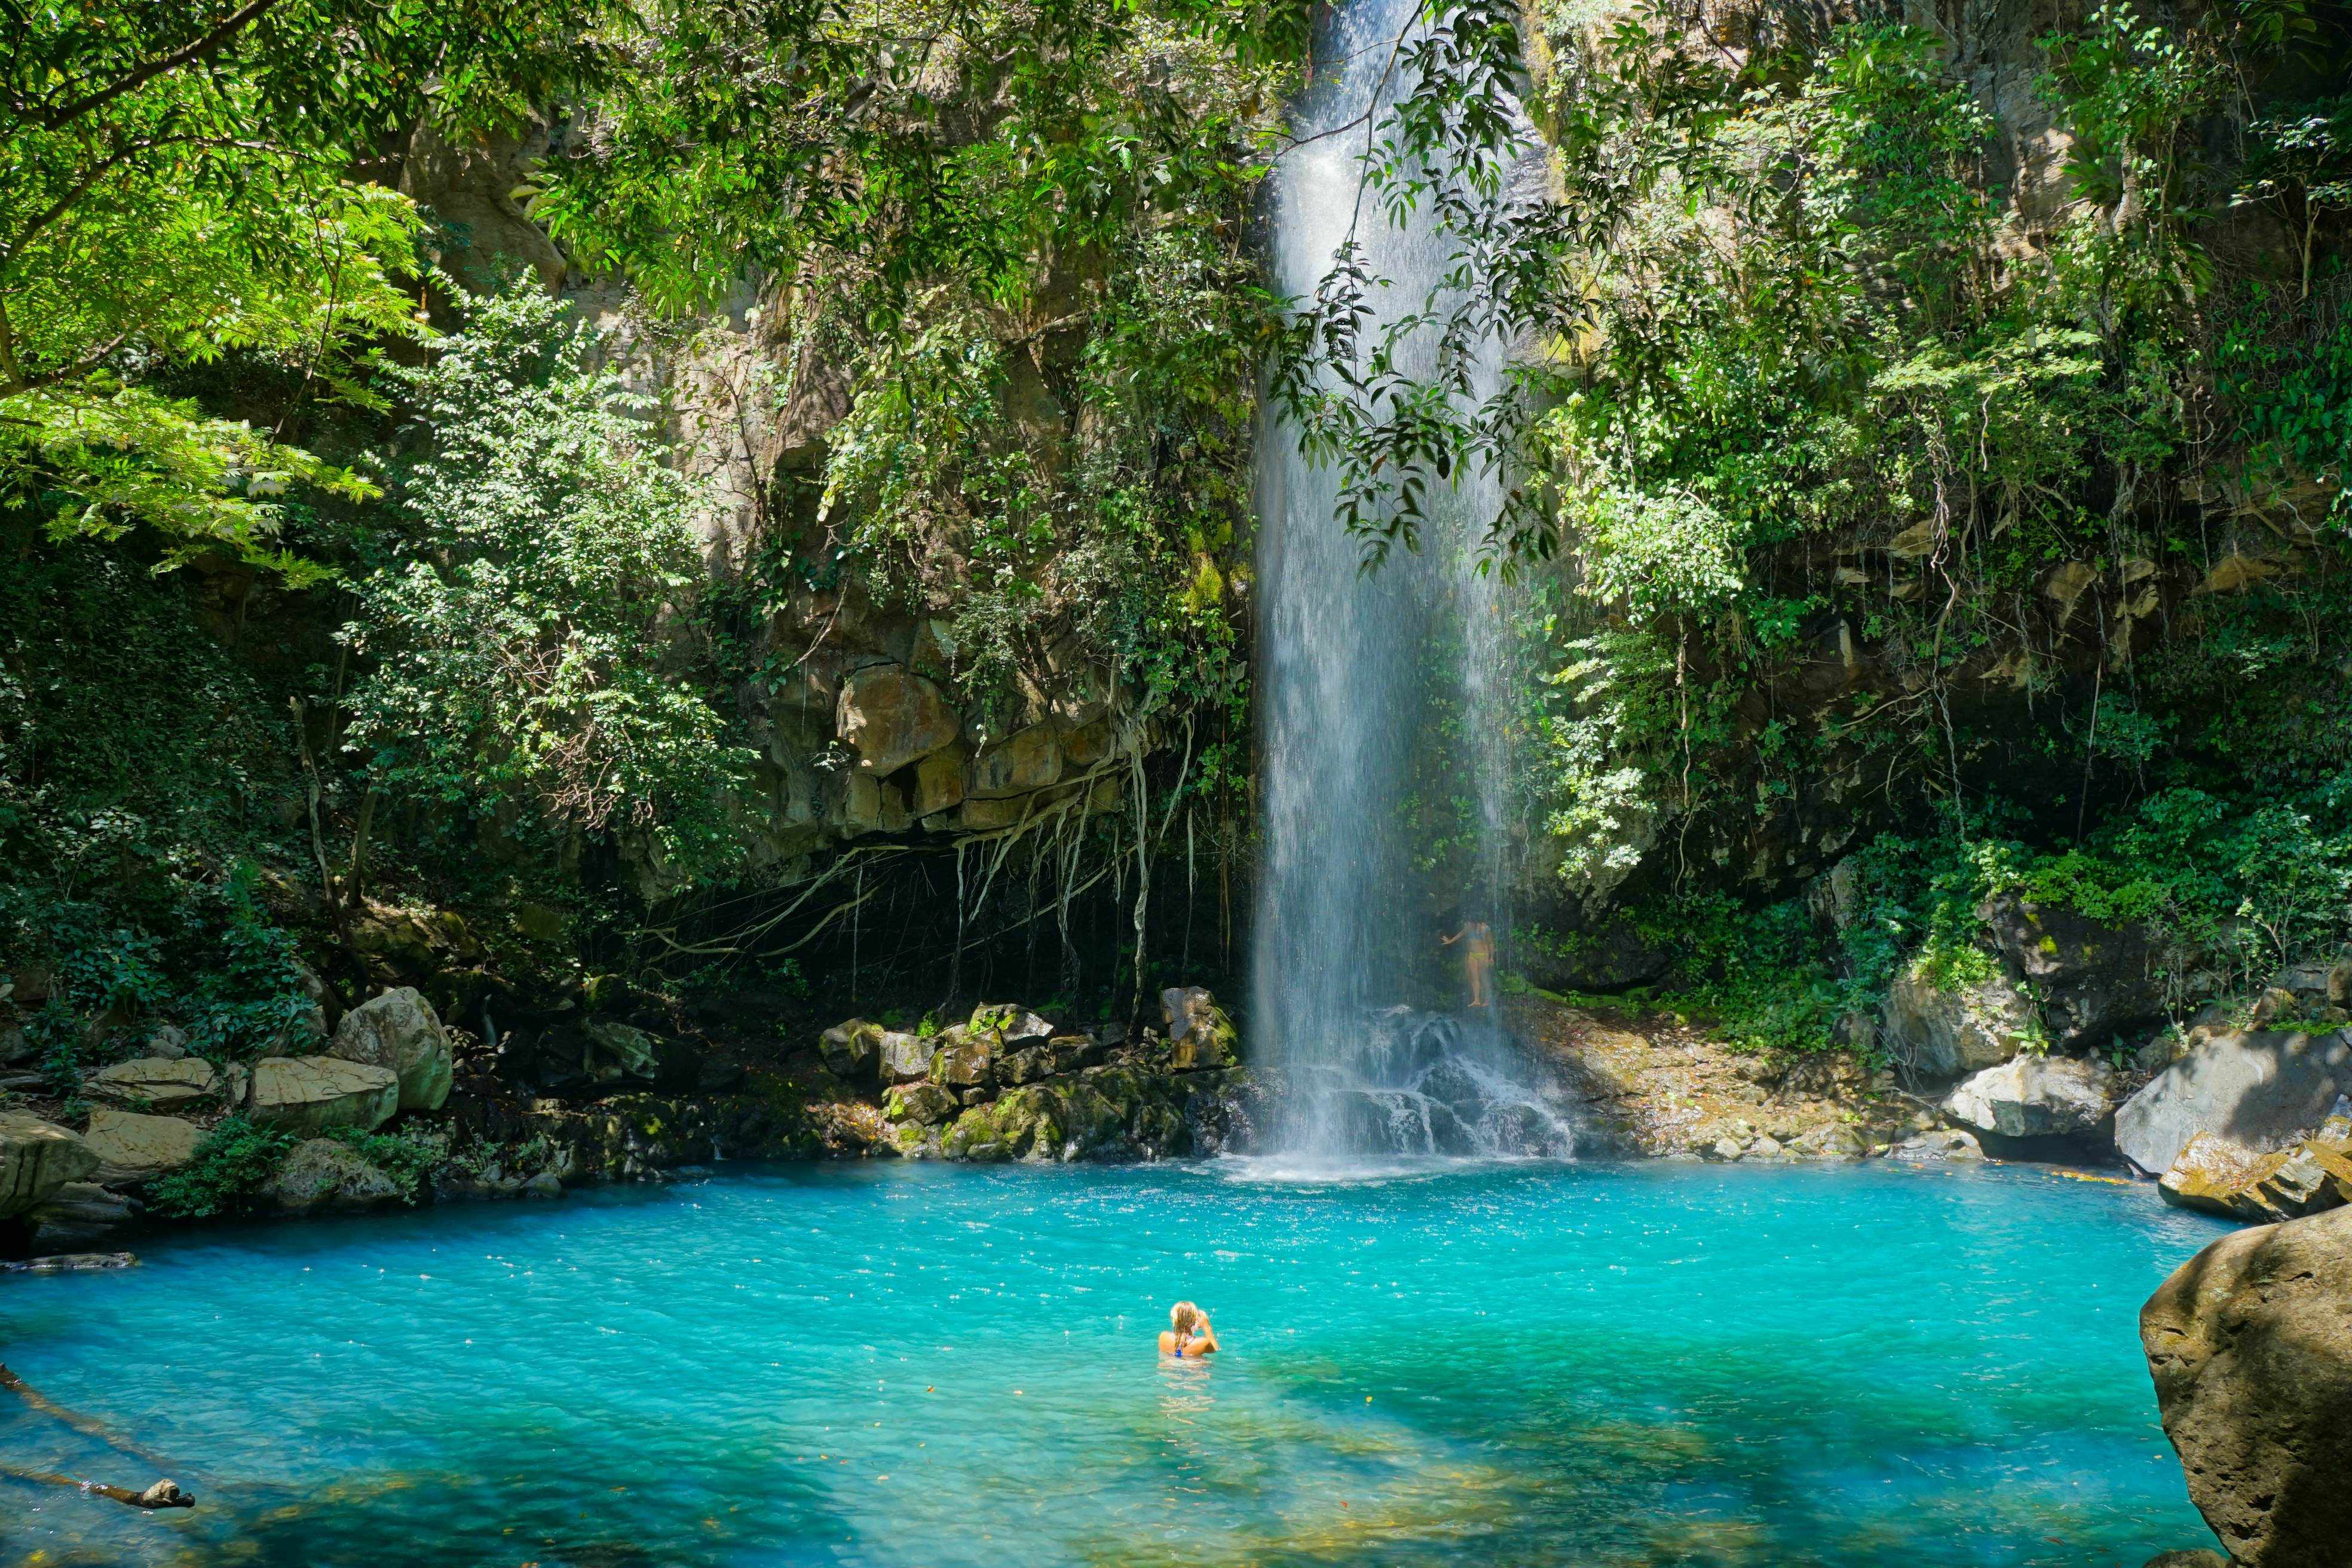 Eik bedelaar toxiciteit Costa Rica Travel Guide - Lonely Planet | Central America